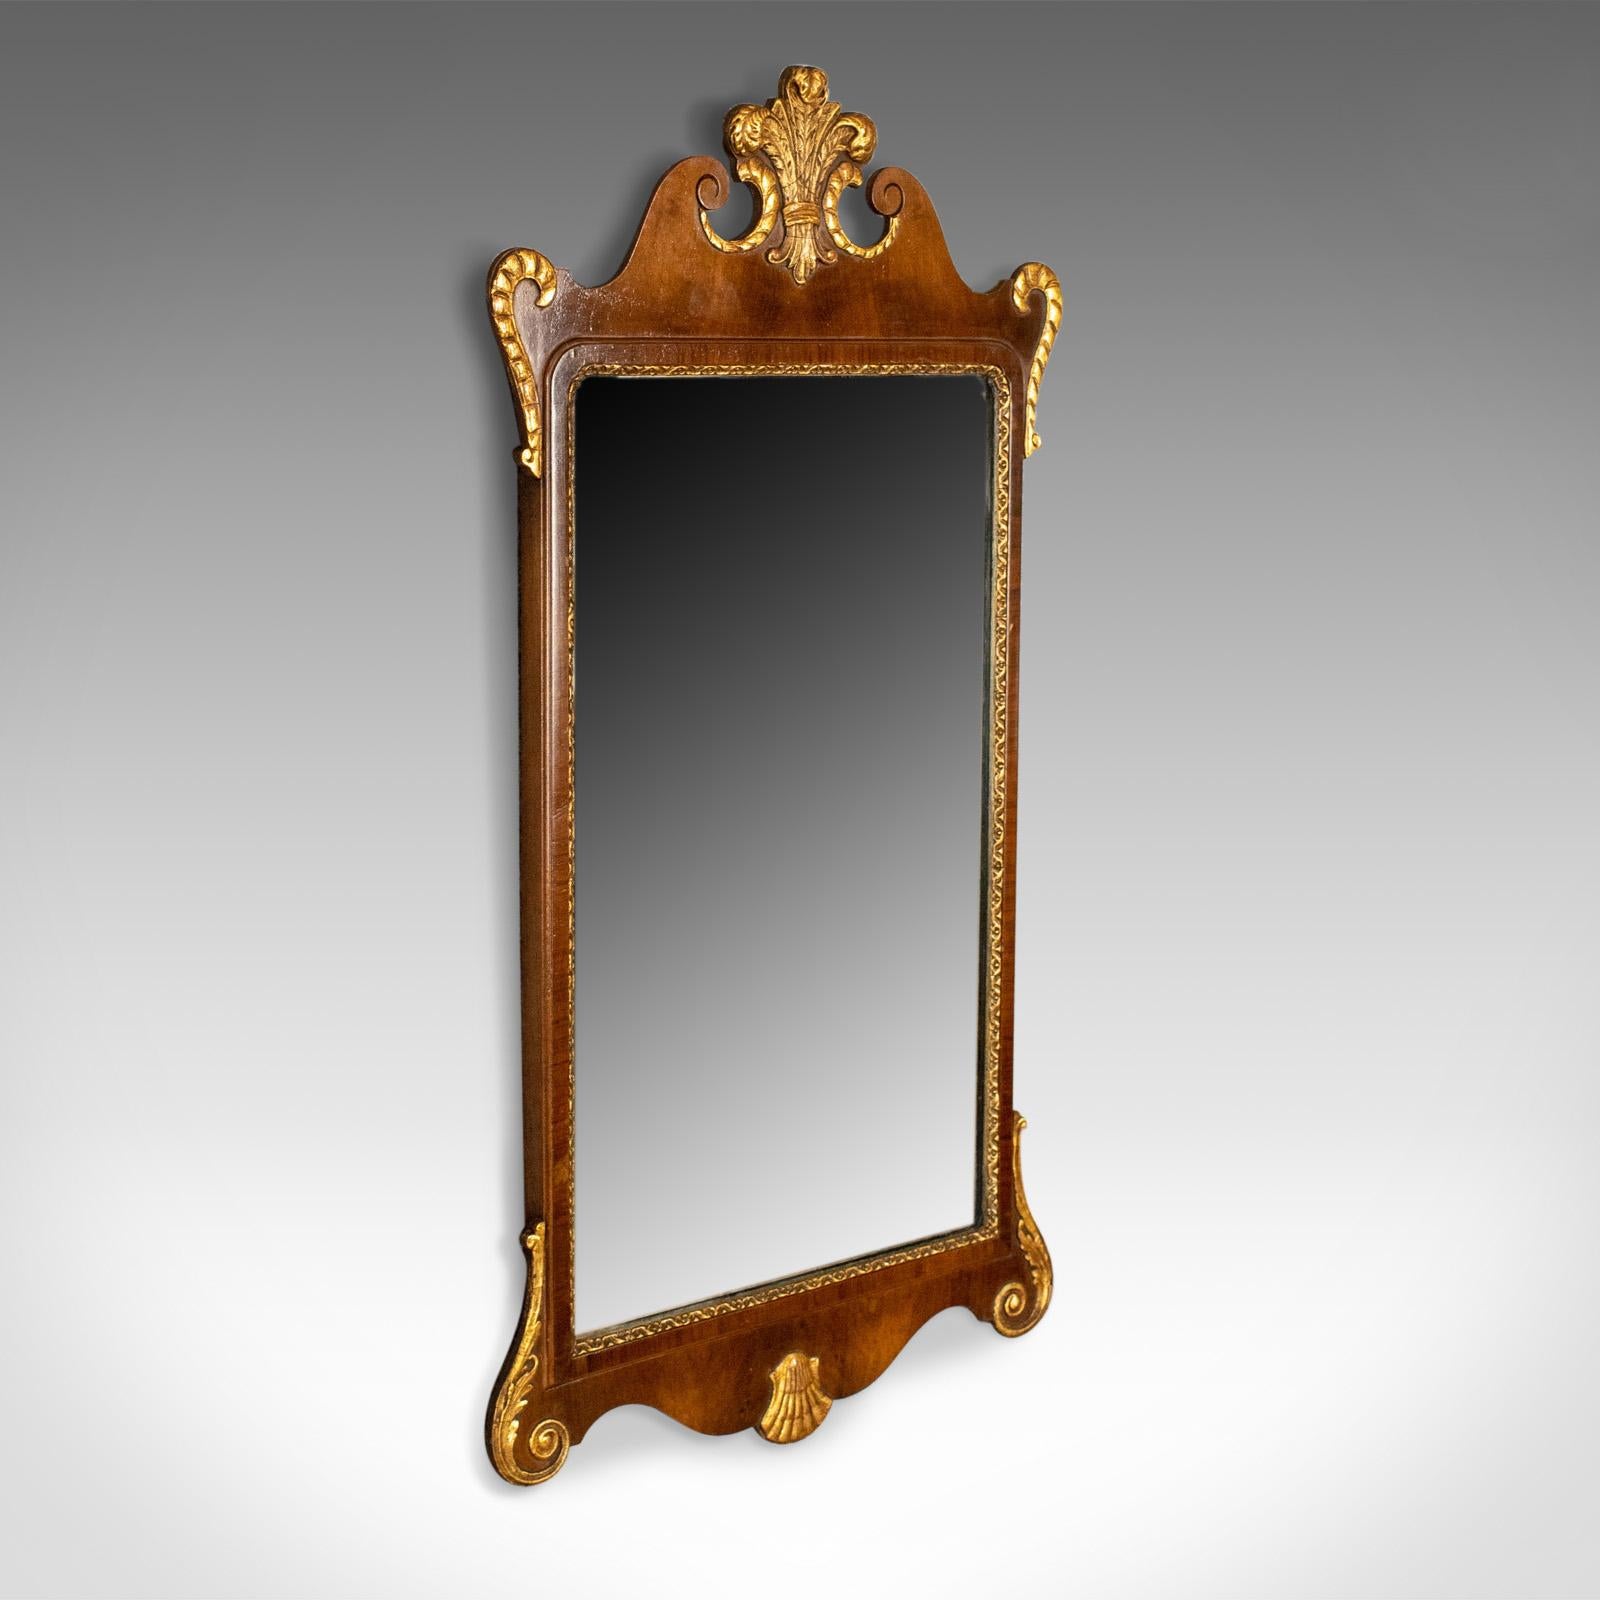 This is an antique wall mirror, an English, Victorian vanity mirror in walnut with gilded decoration dating to circa 1880.

A delightful, mid-sized wall mirror with regal overtones
Sumptuous dark walnut highlighted with gilded